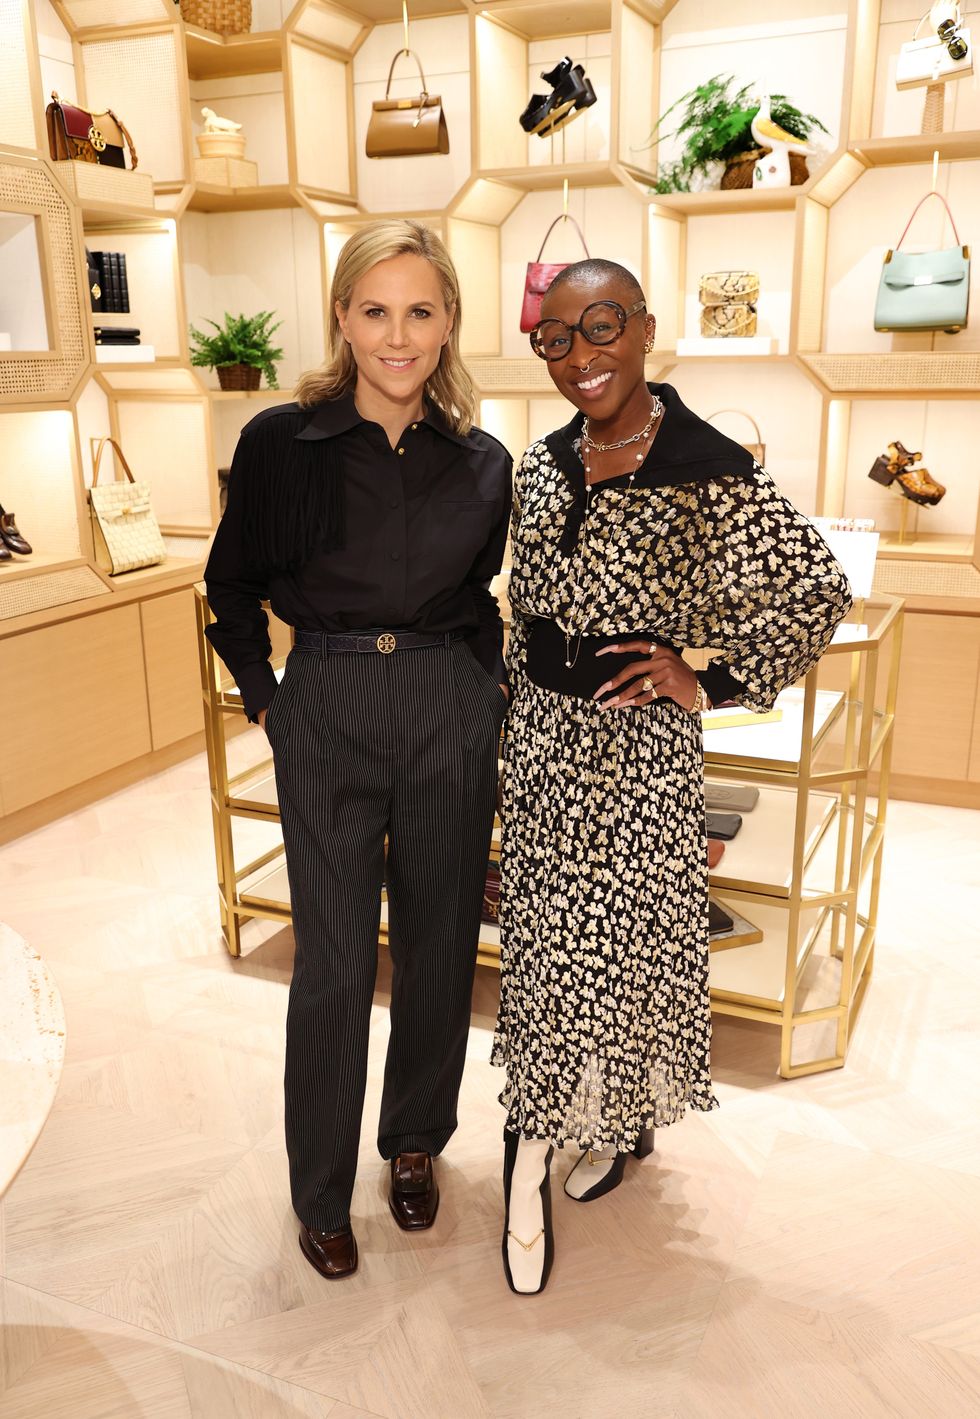 tory burch and cynthia erivo celebrate cynthia's first book, remember to dream, ebere at the tory burch mercer street store